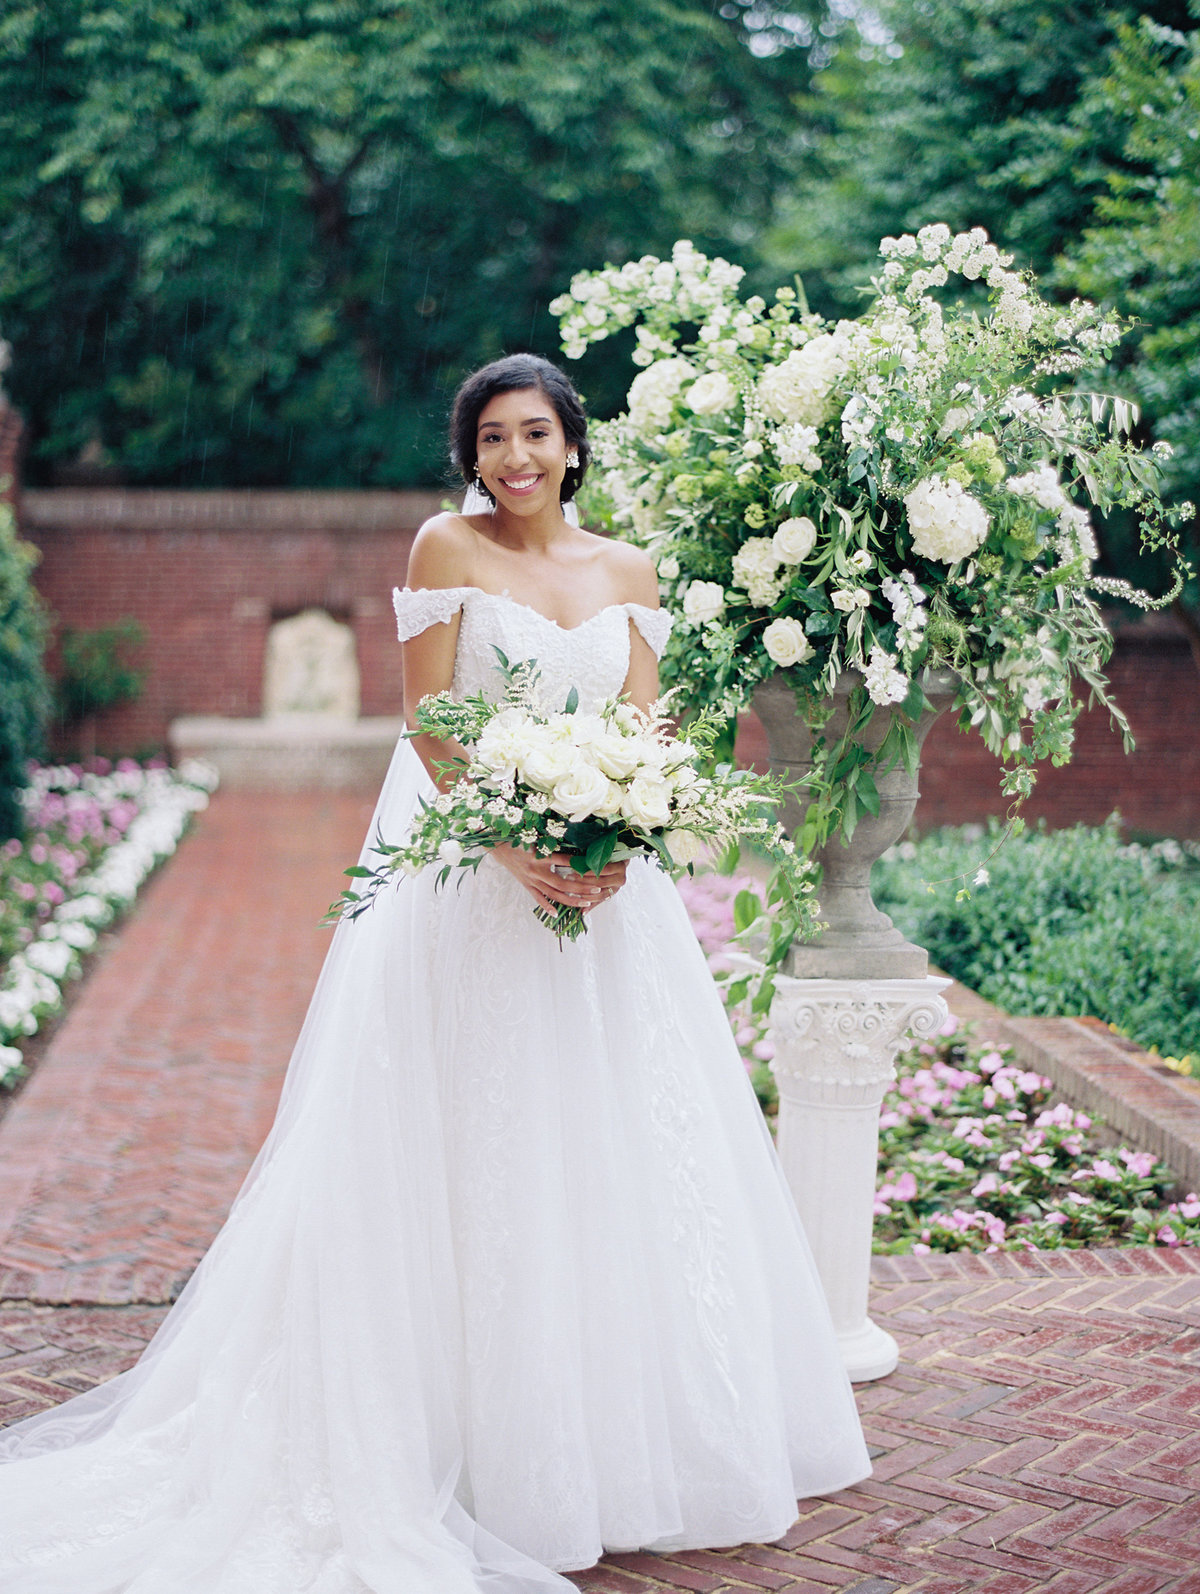 Bride with white bouquet in front of a large arrangement with white flowers